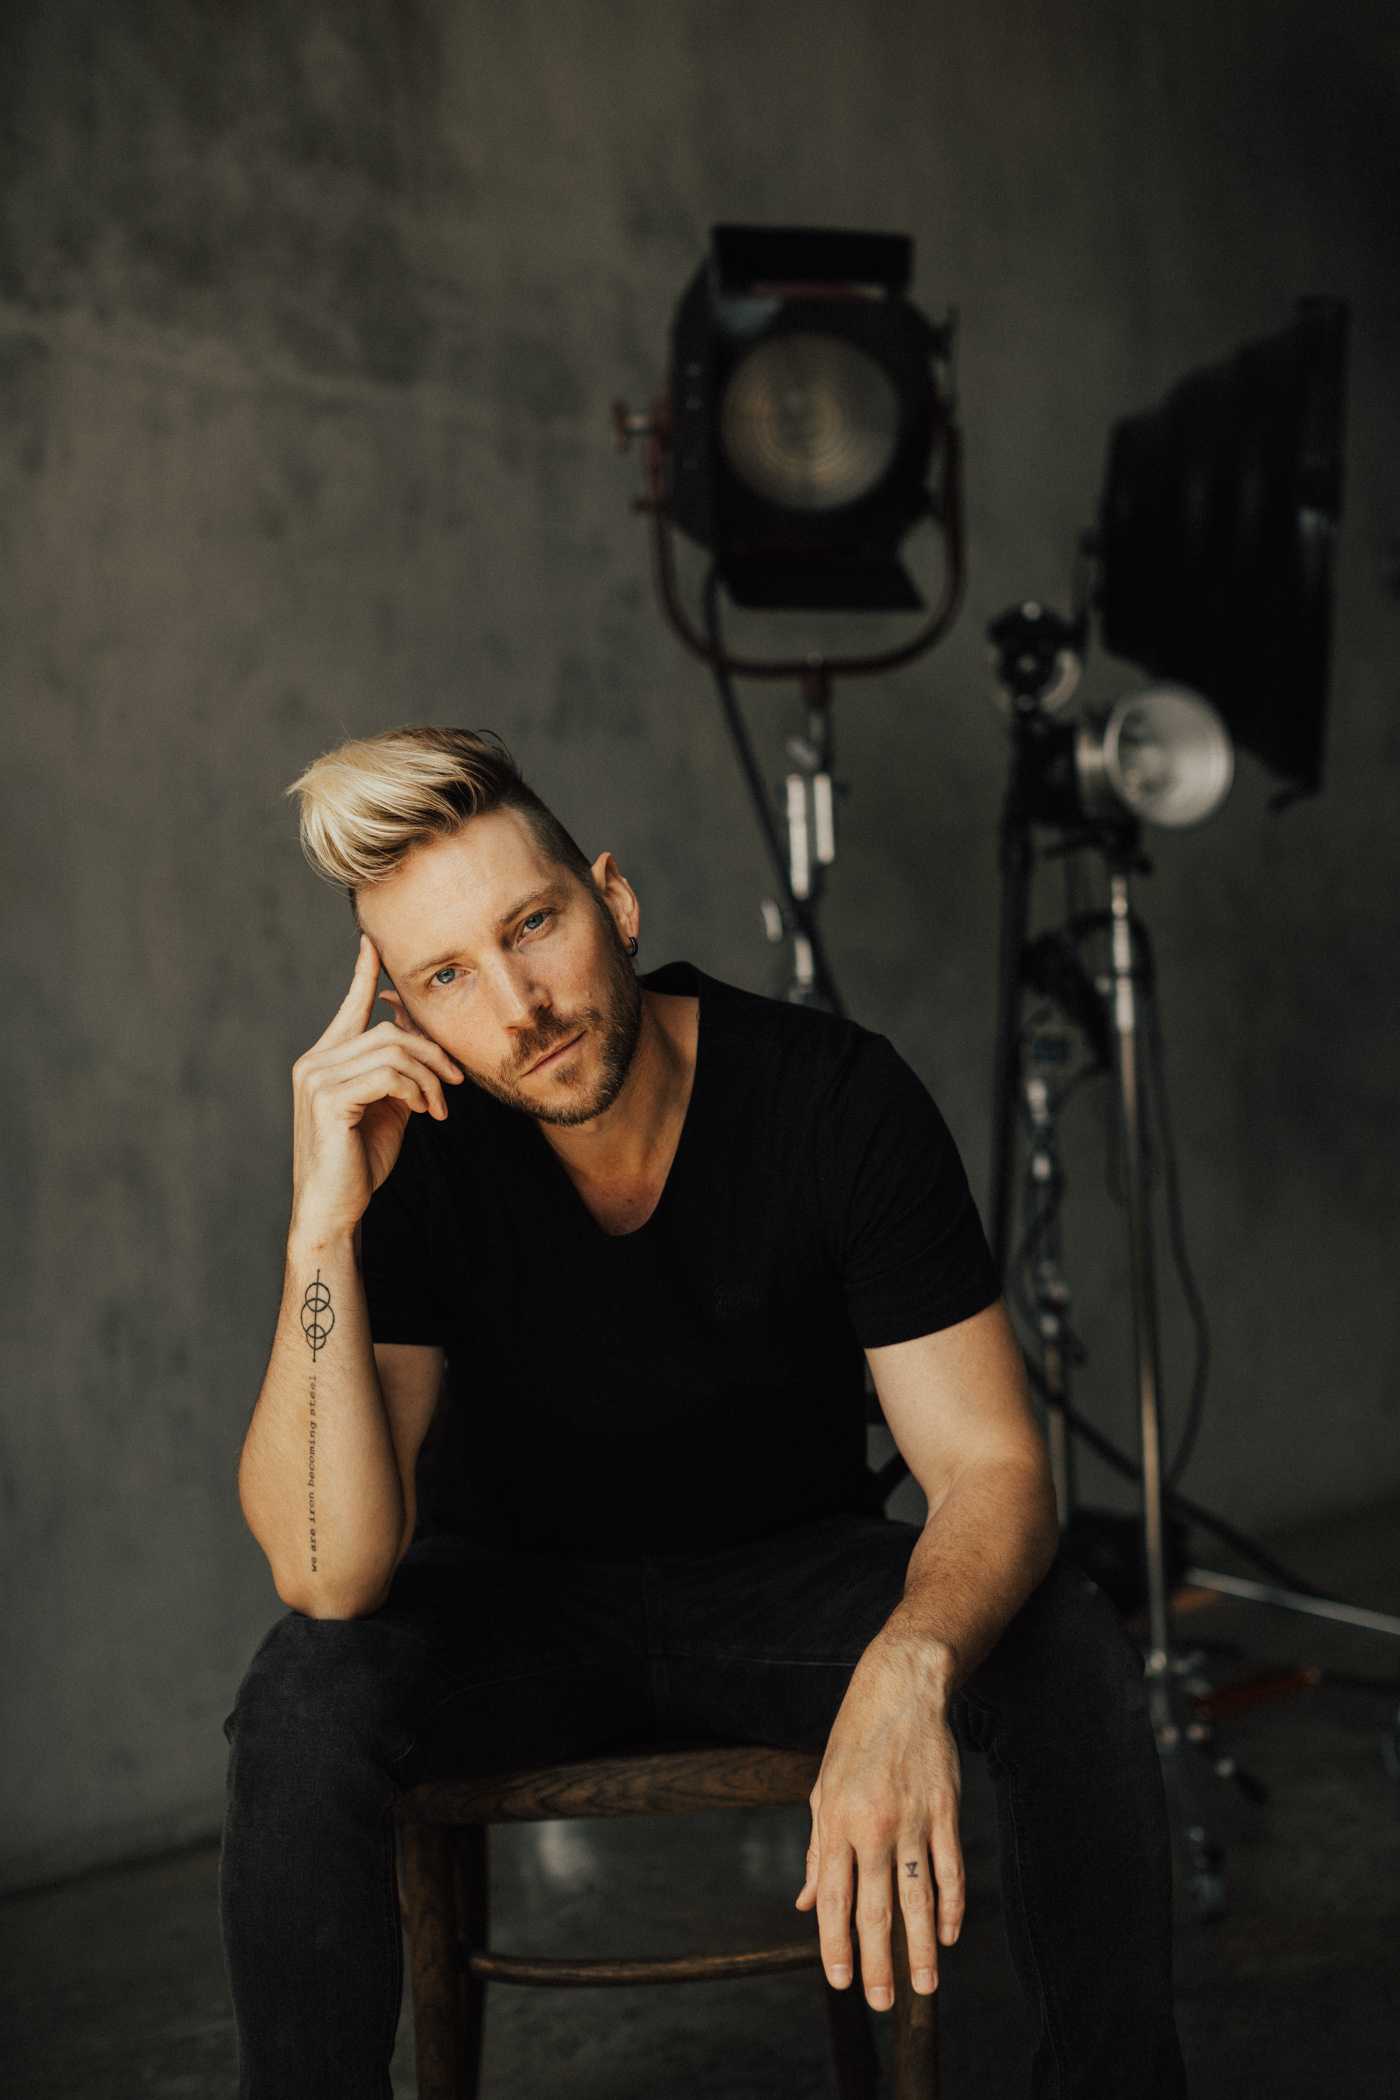 Troy Baker's Been Gaming's Leading Man For a Decade, And He Has